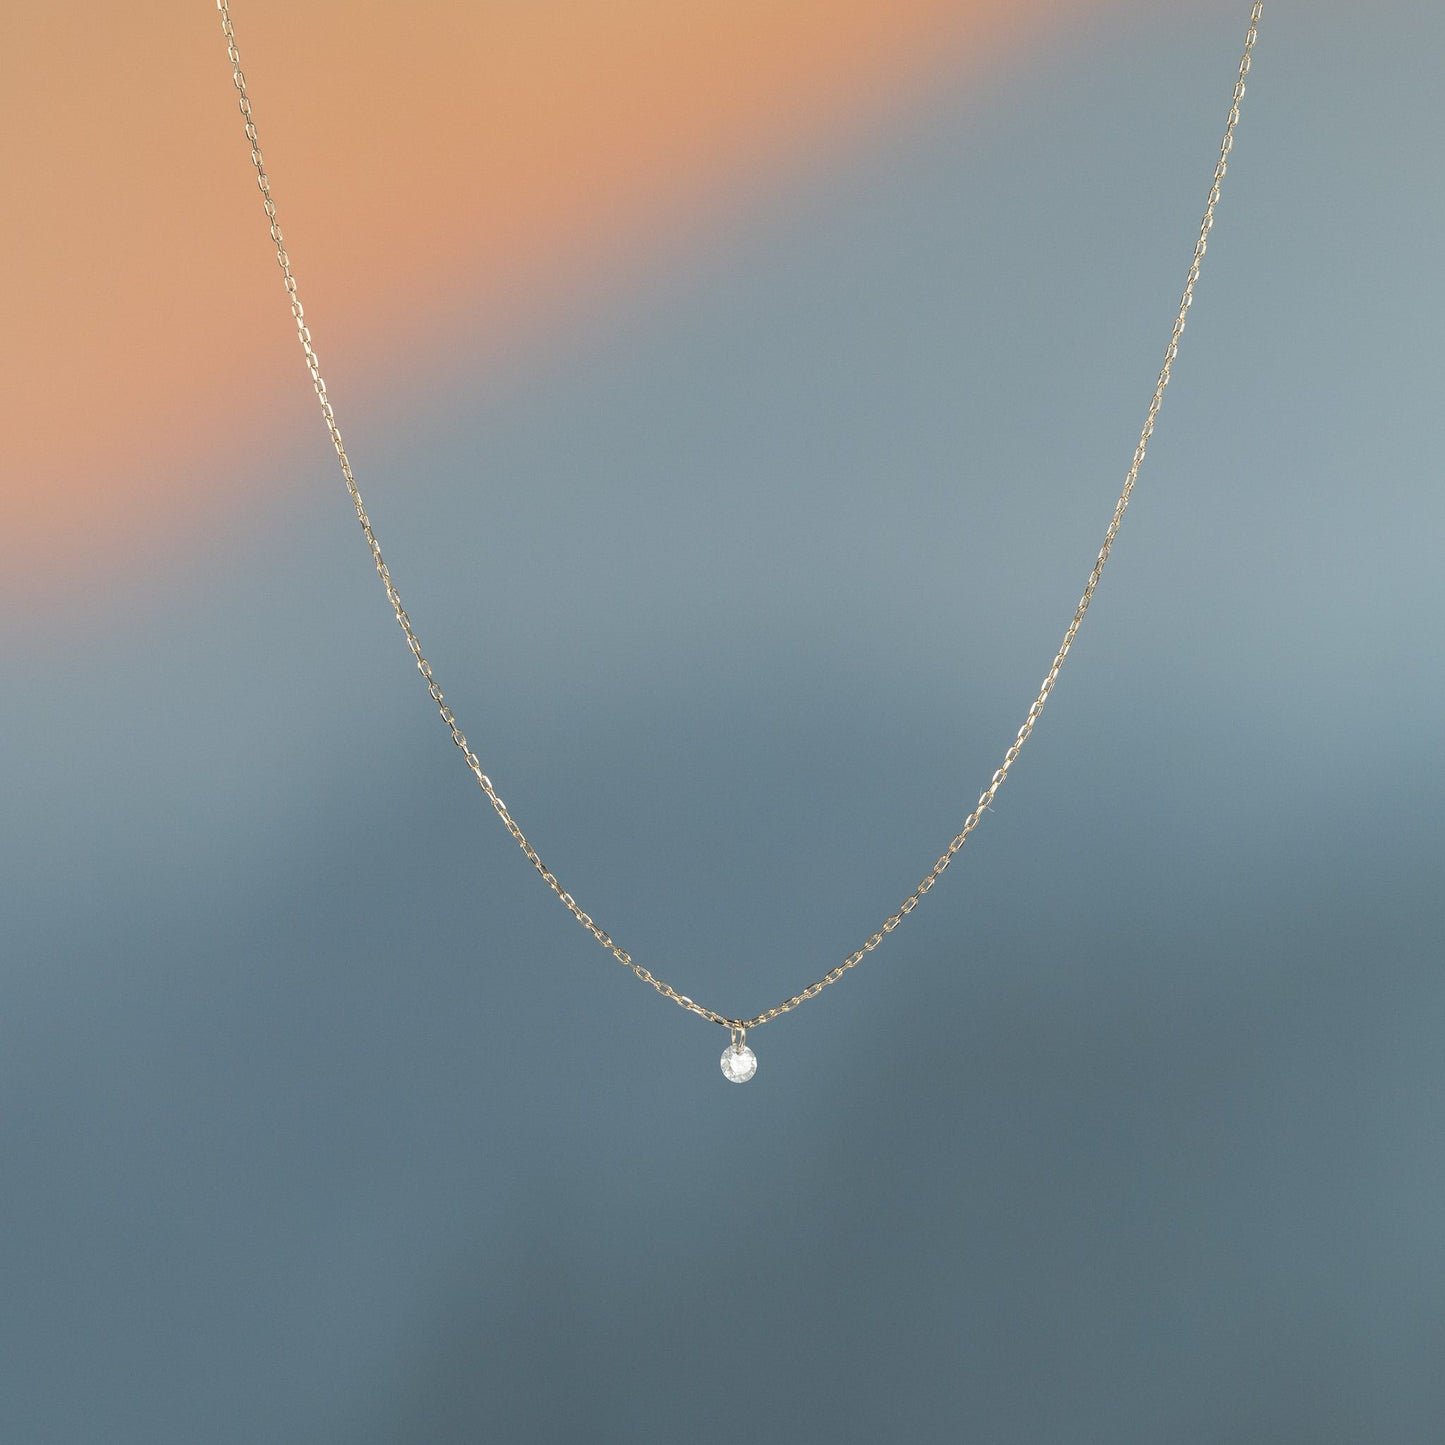 14K Yellow Gold Simple Chain Necklace with Small Floating Diamond